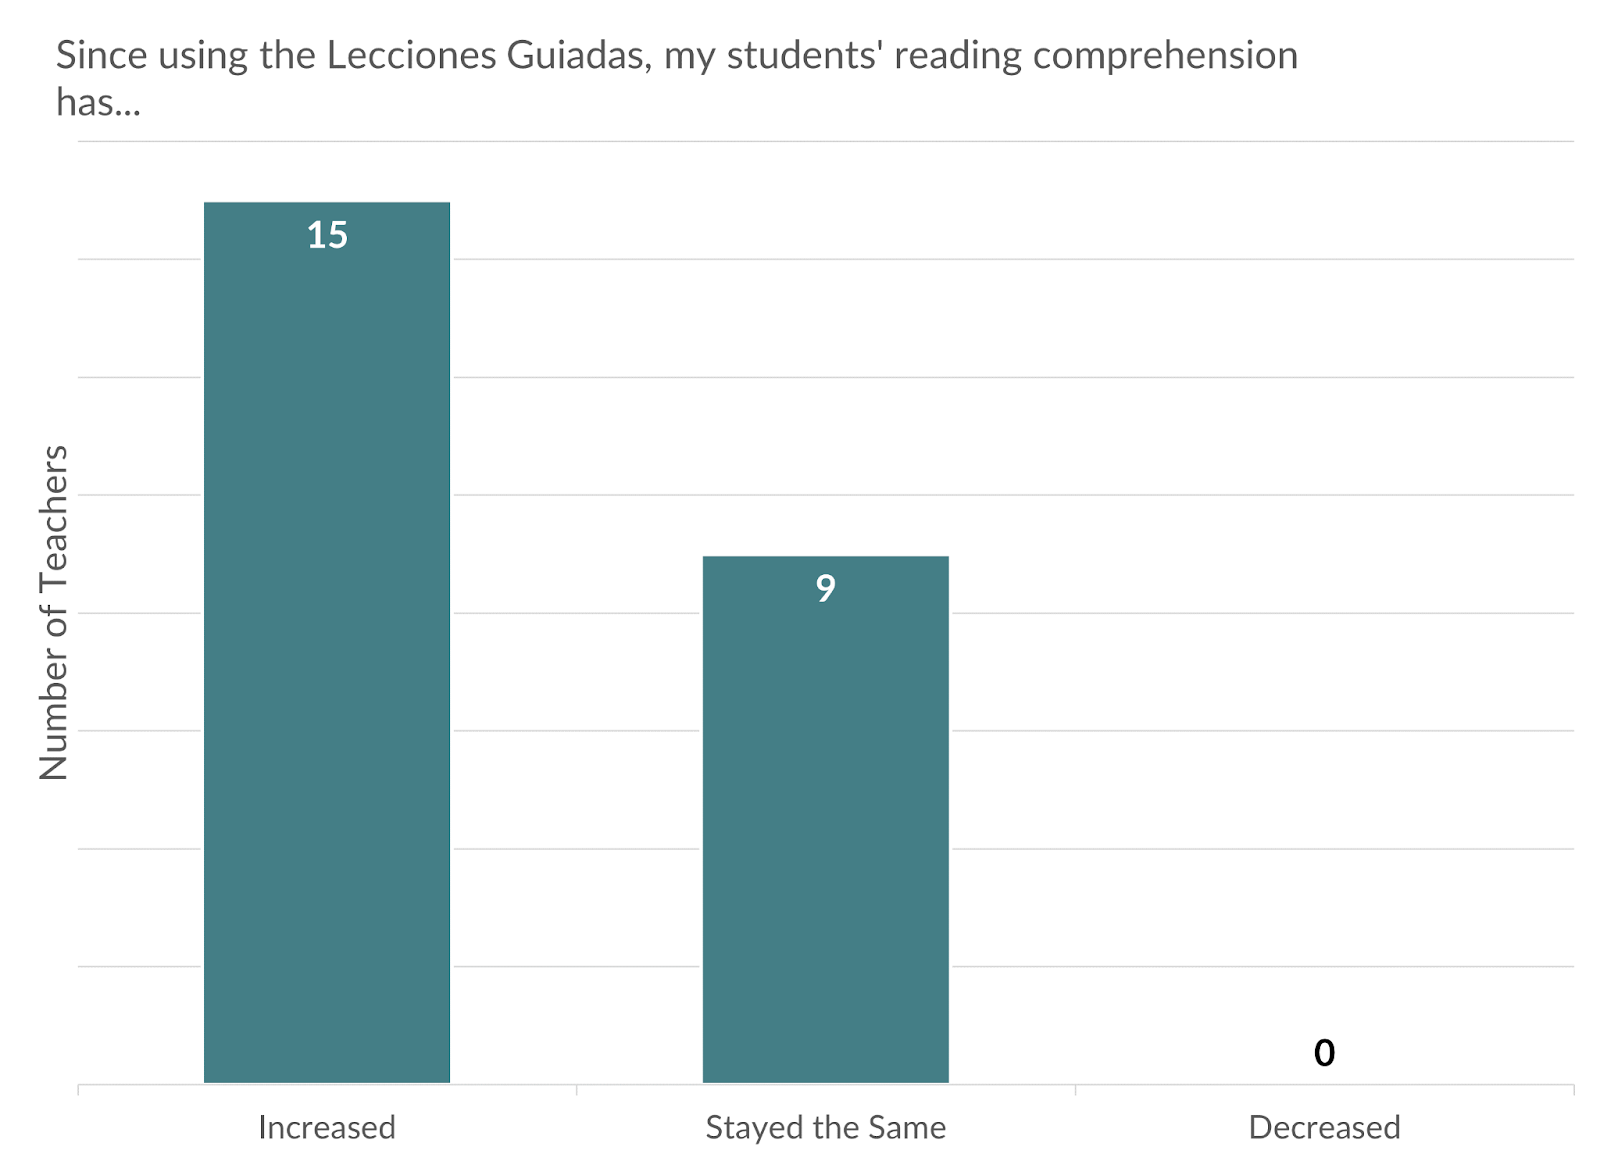 In the treatment group, 63% of teachers reported an observable increase in student reading comprehension. 